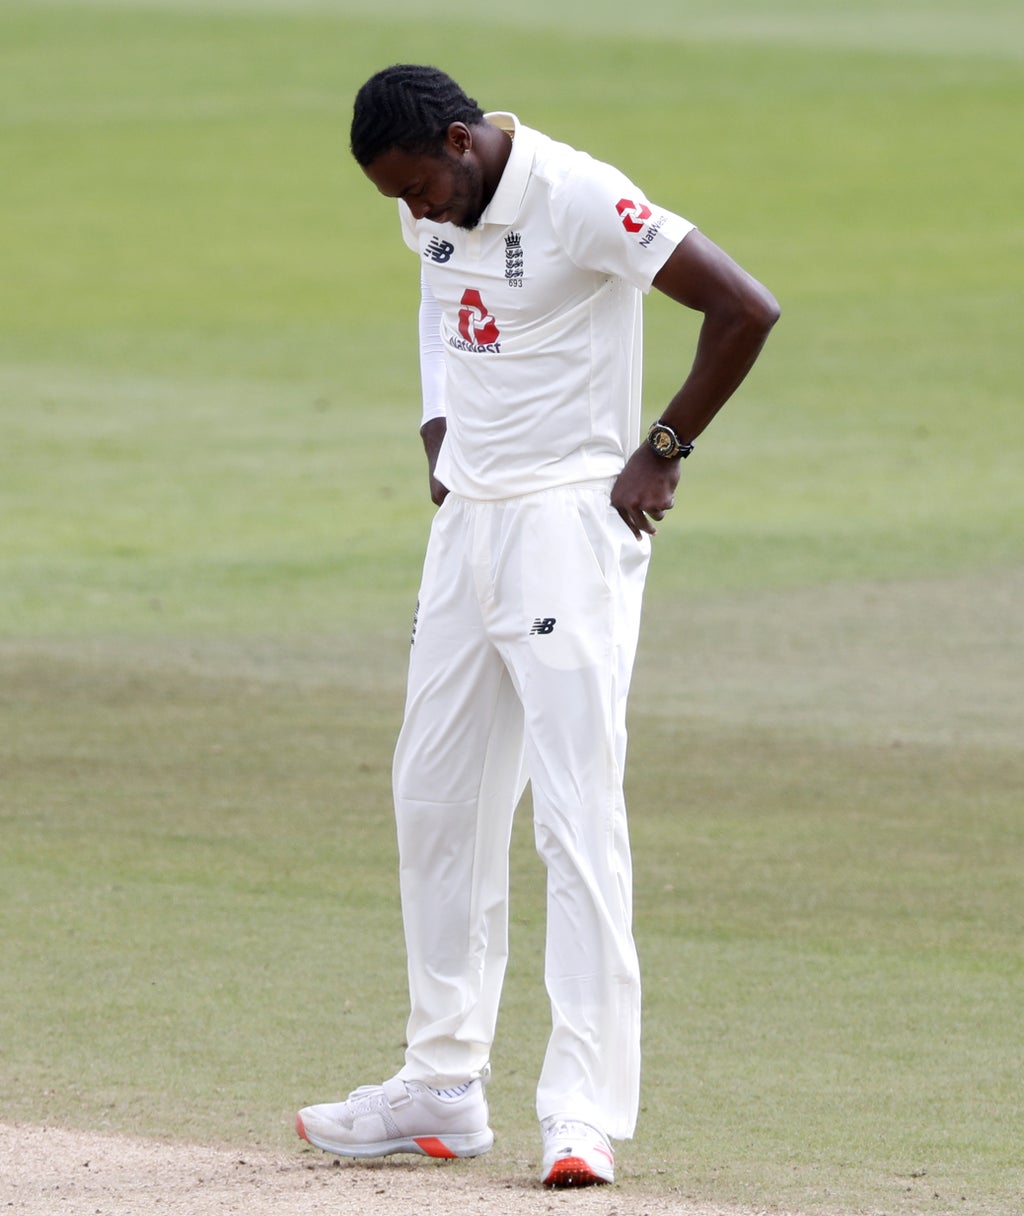 Michael Vaughan fears Jofra Archer’s Test career could be over